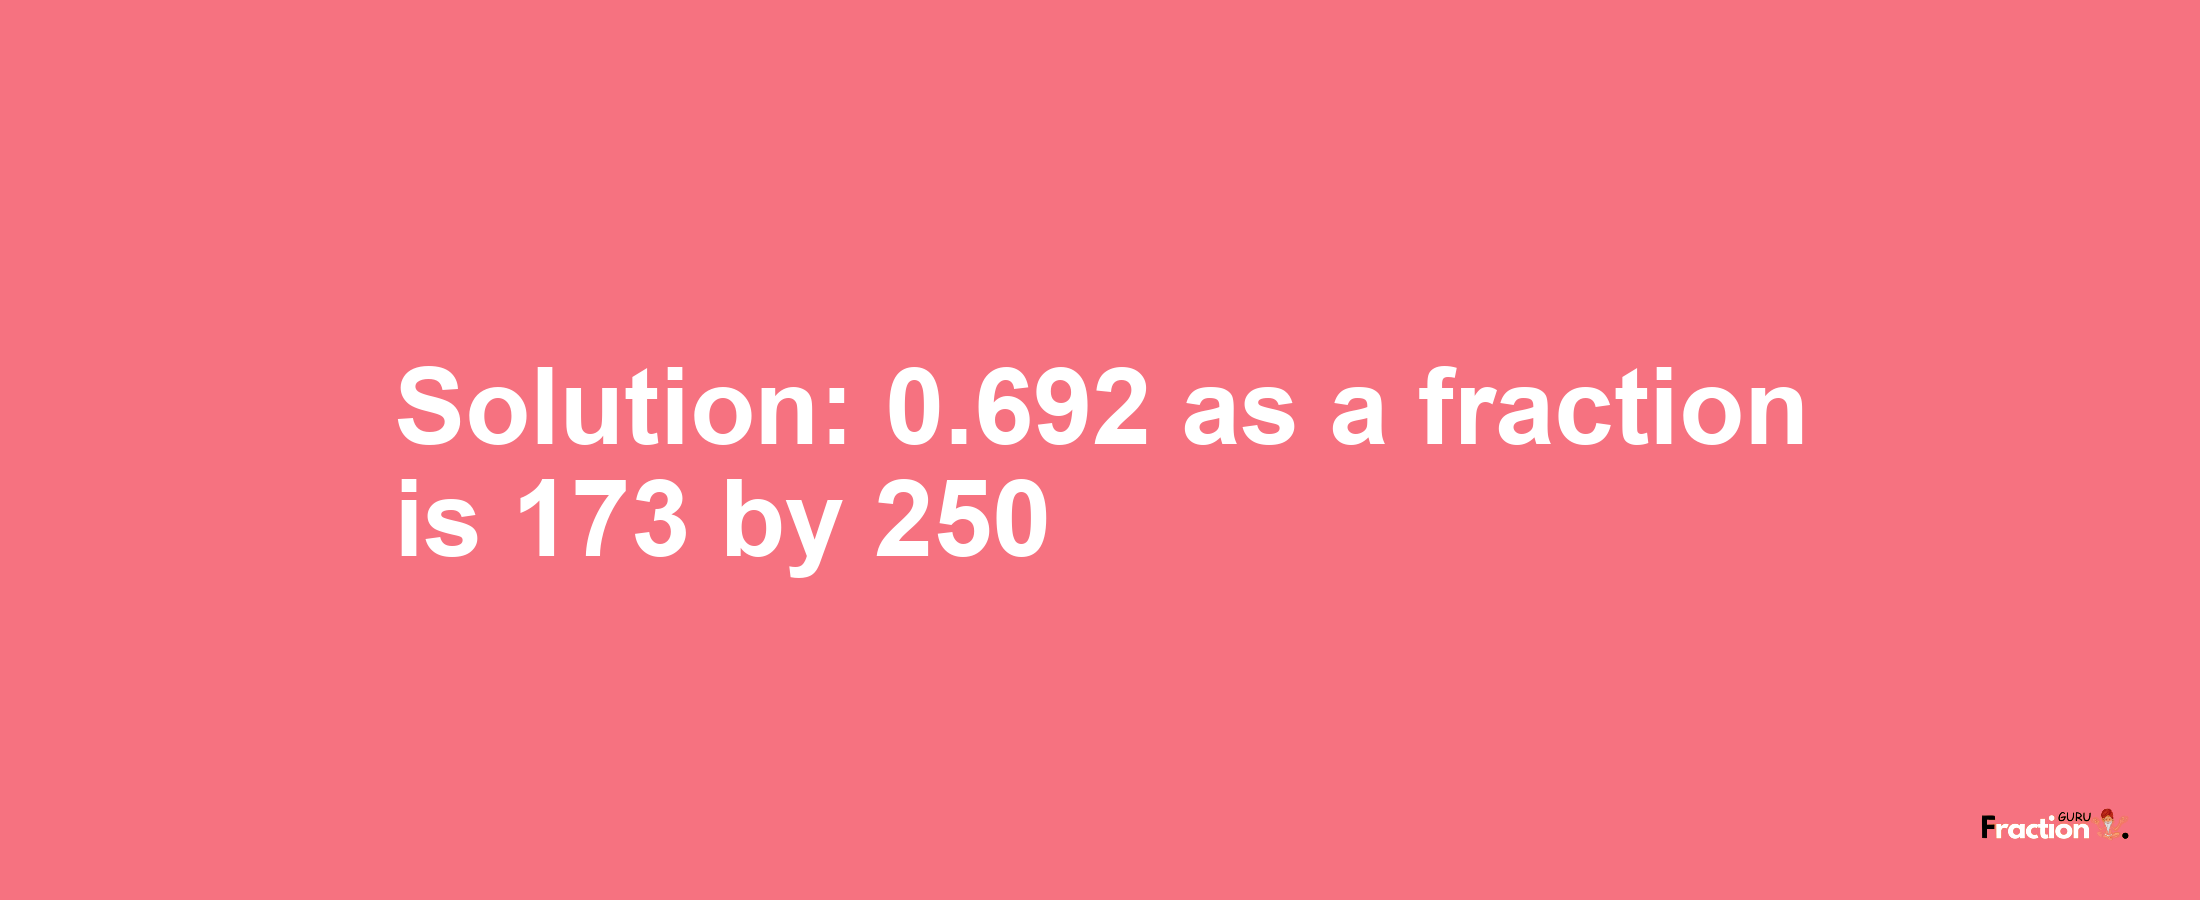 Solution:0.692 as a fraction is 173/250